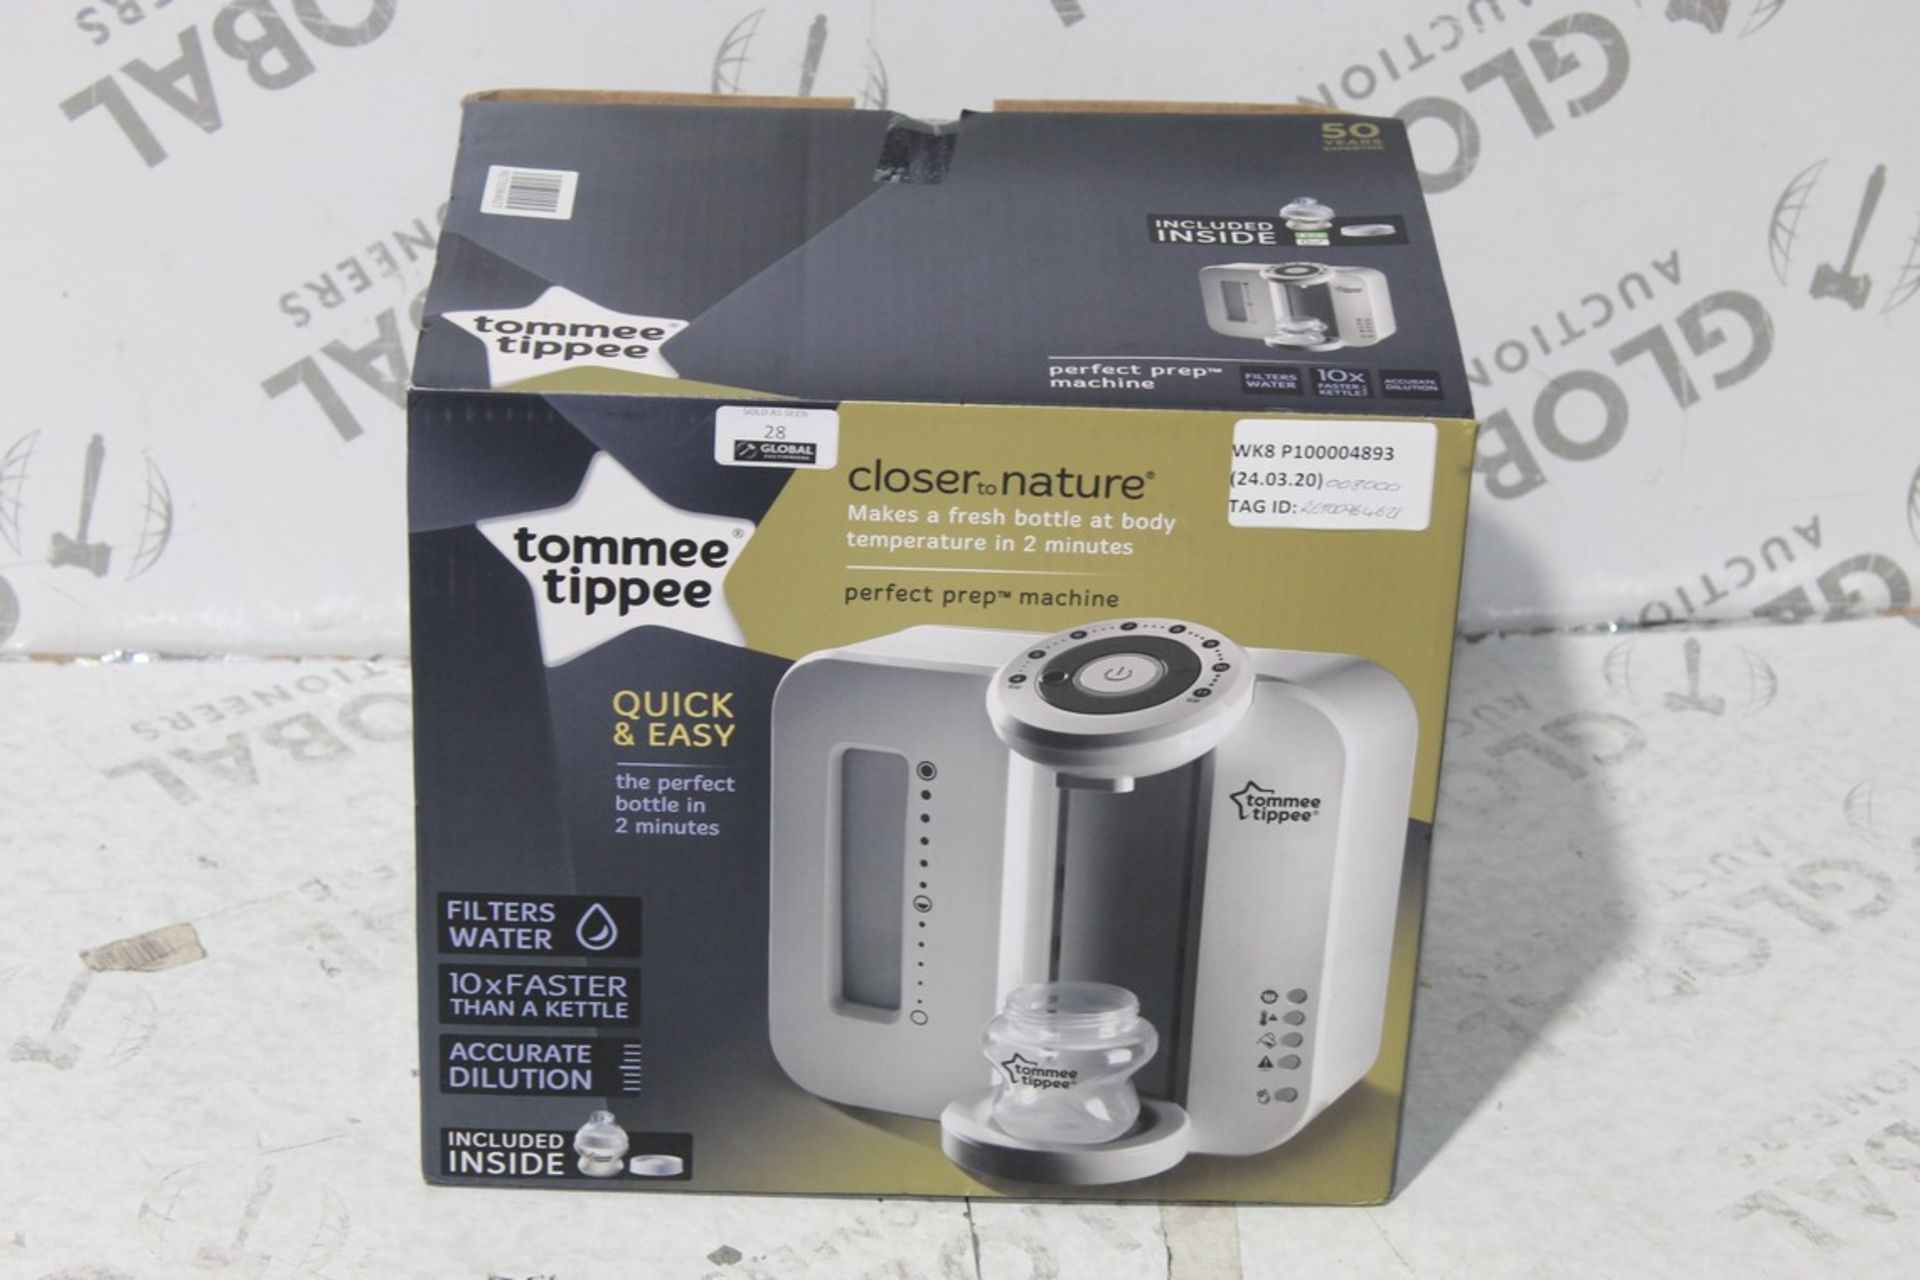 Boxed Tommee Tippee Closure to Nature Electric Bottle Warming Station RRP £80 (RET00964621) (